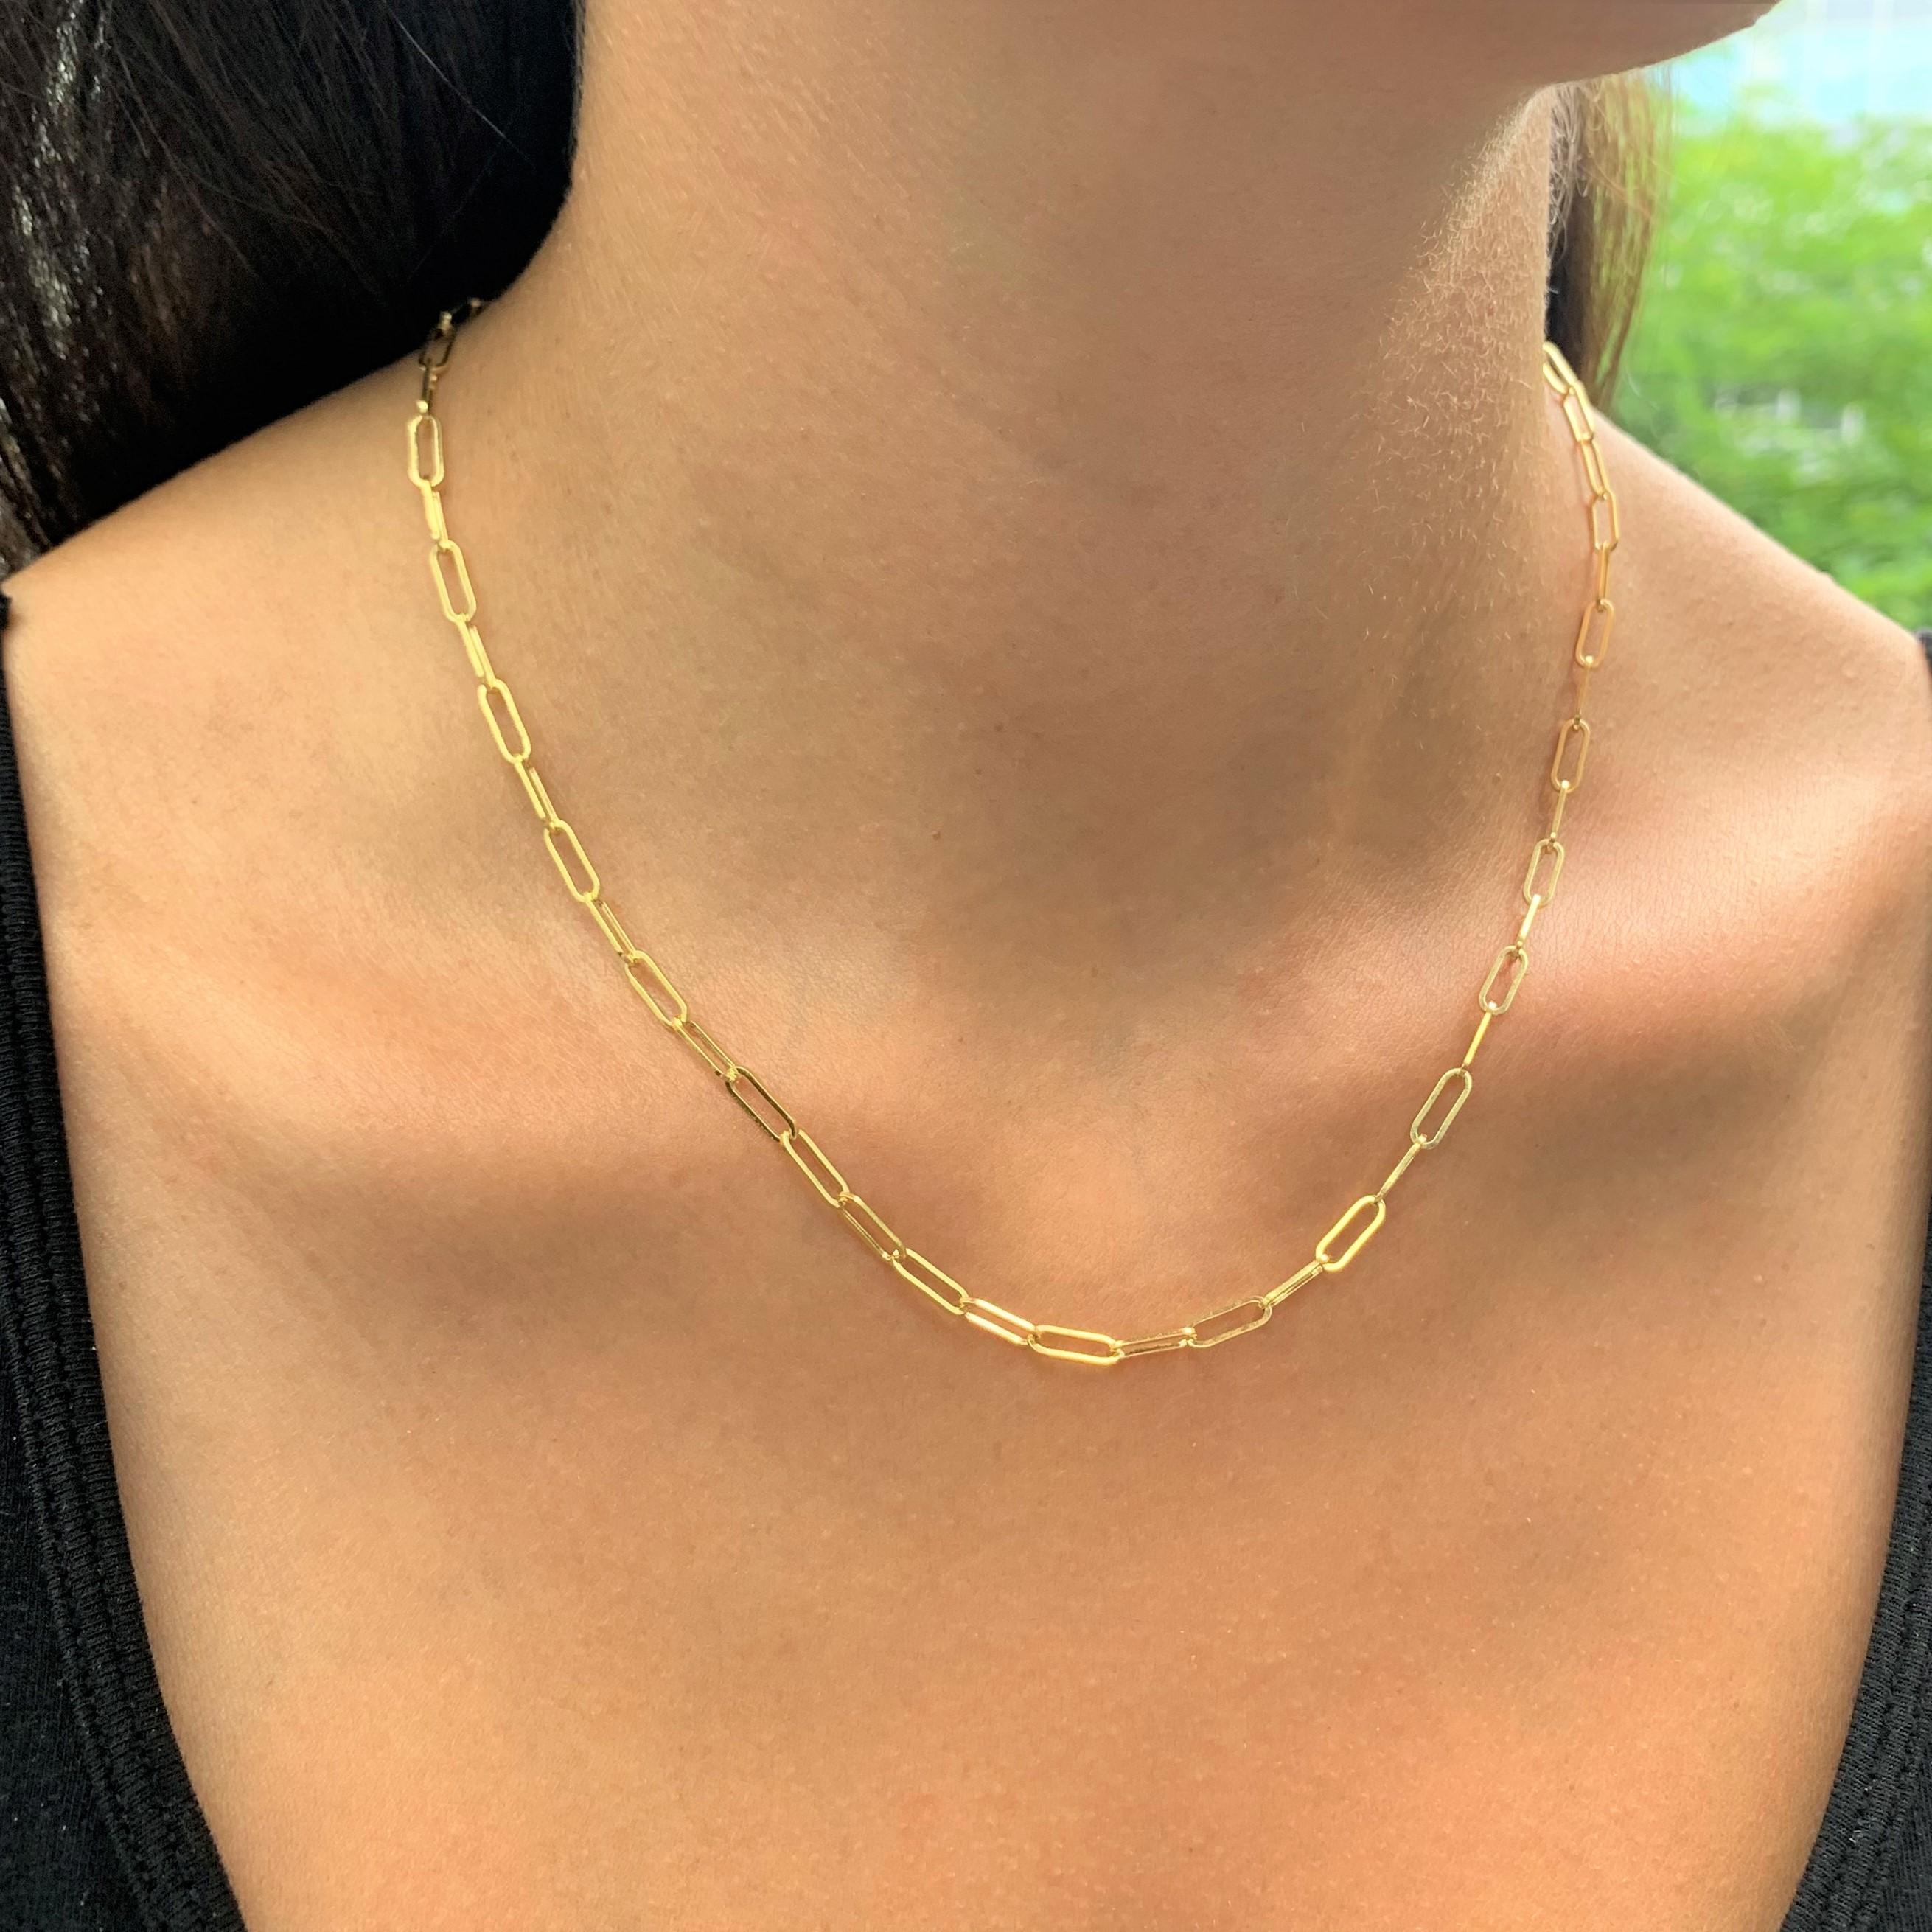 This 14k yellow gold paper-clip small link chain comes with plenty of options, specifically your choice of length. Buy one and wear it as a simple standalone (with or without a pendant) or pick up multiple chains of varying lengths to create a